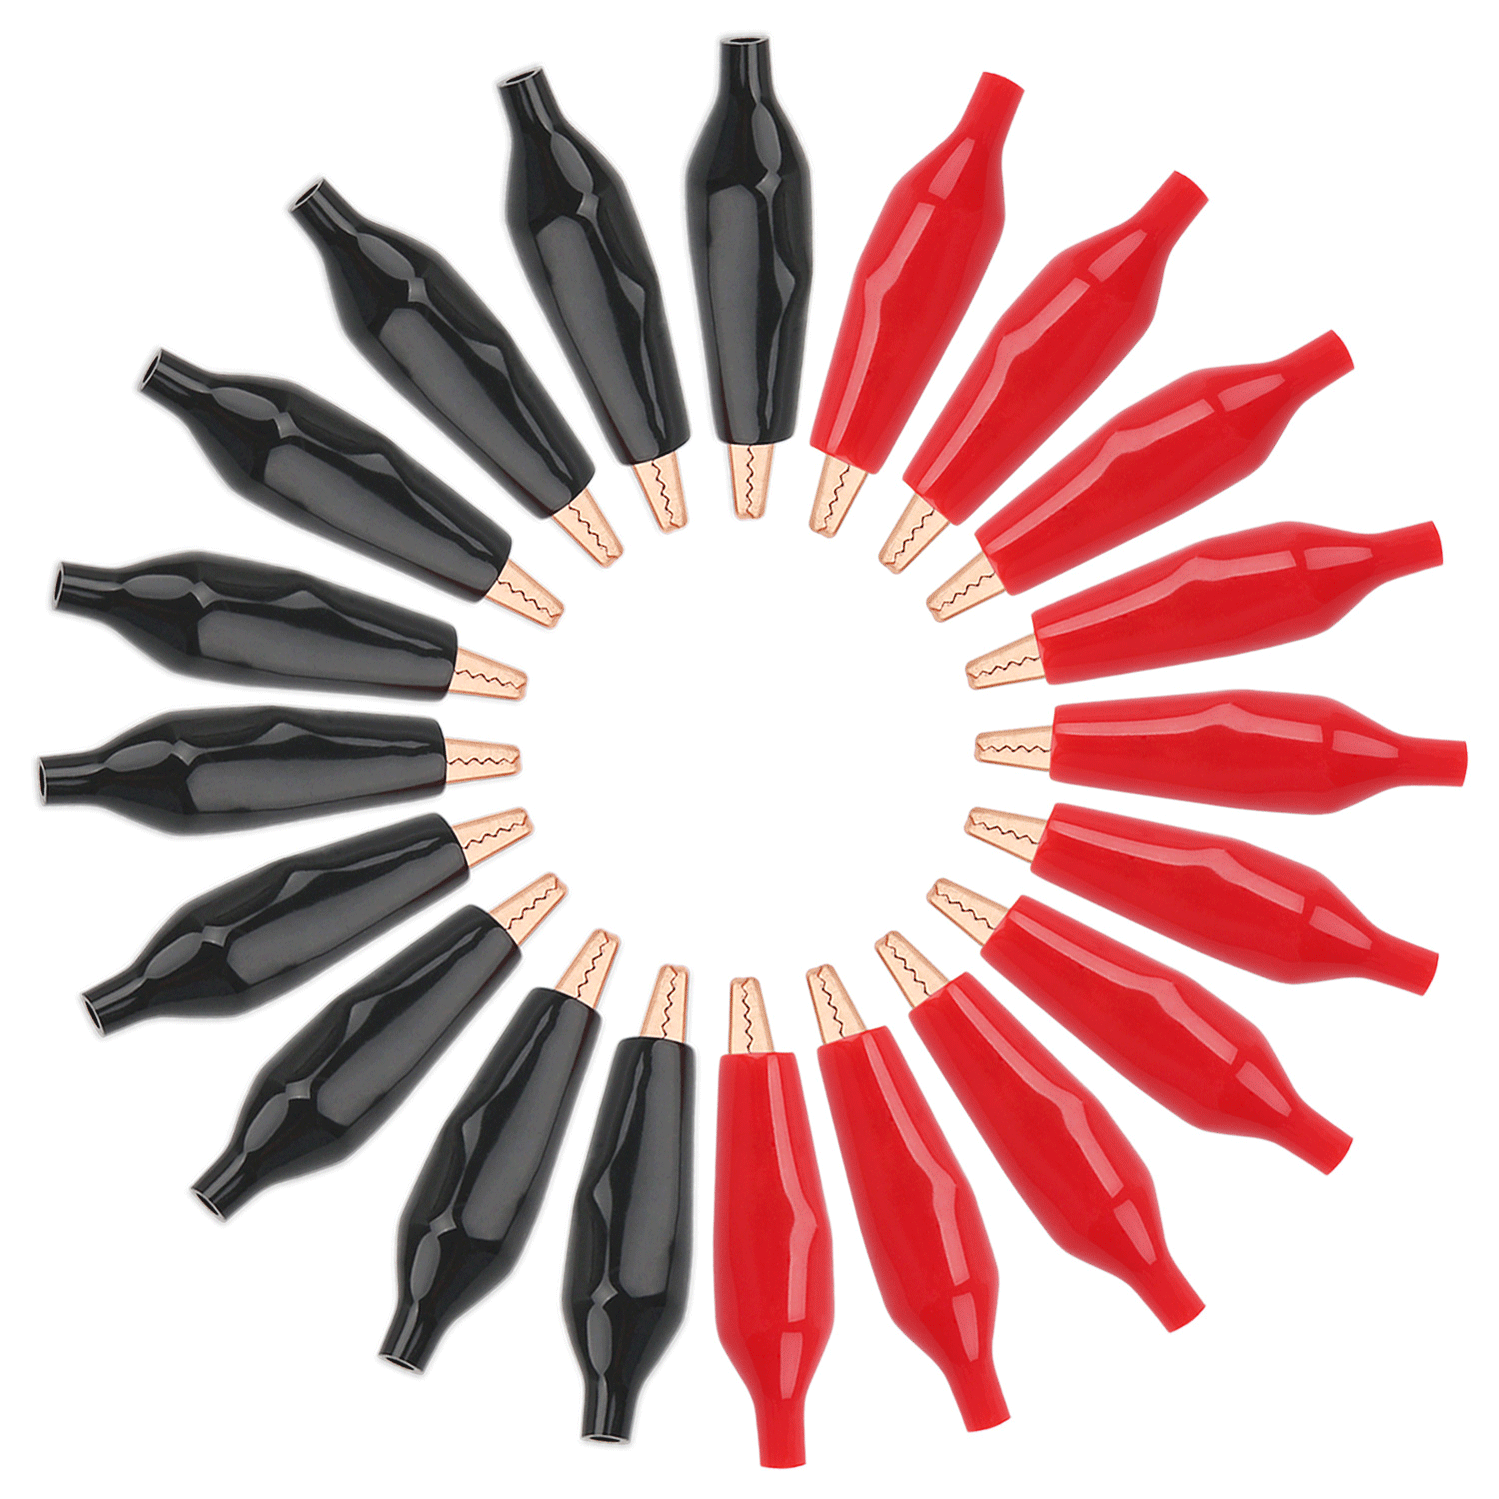 50 PCS/LOT Thicken Alligator clips 10A Copper Clip Clamp Electric Test helper with Black or Red Protective Insulation Cover